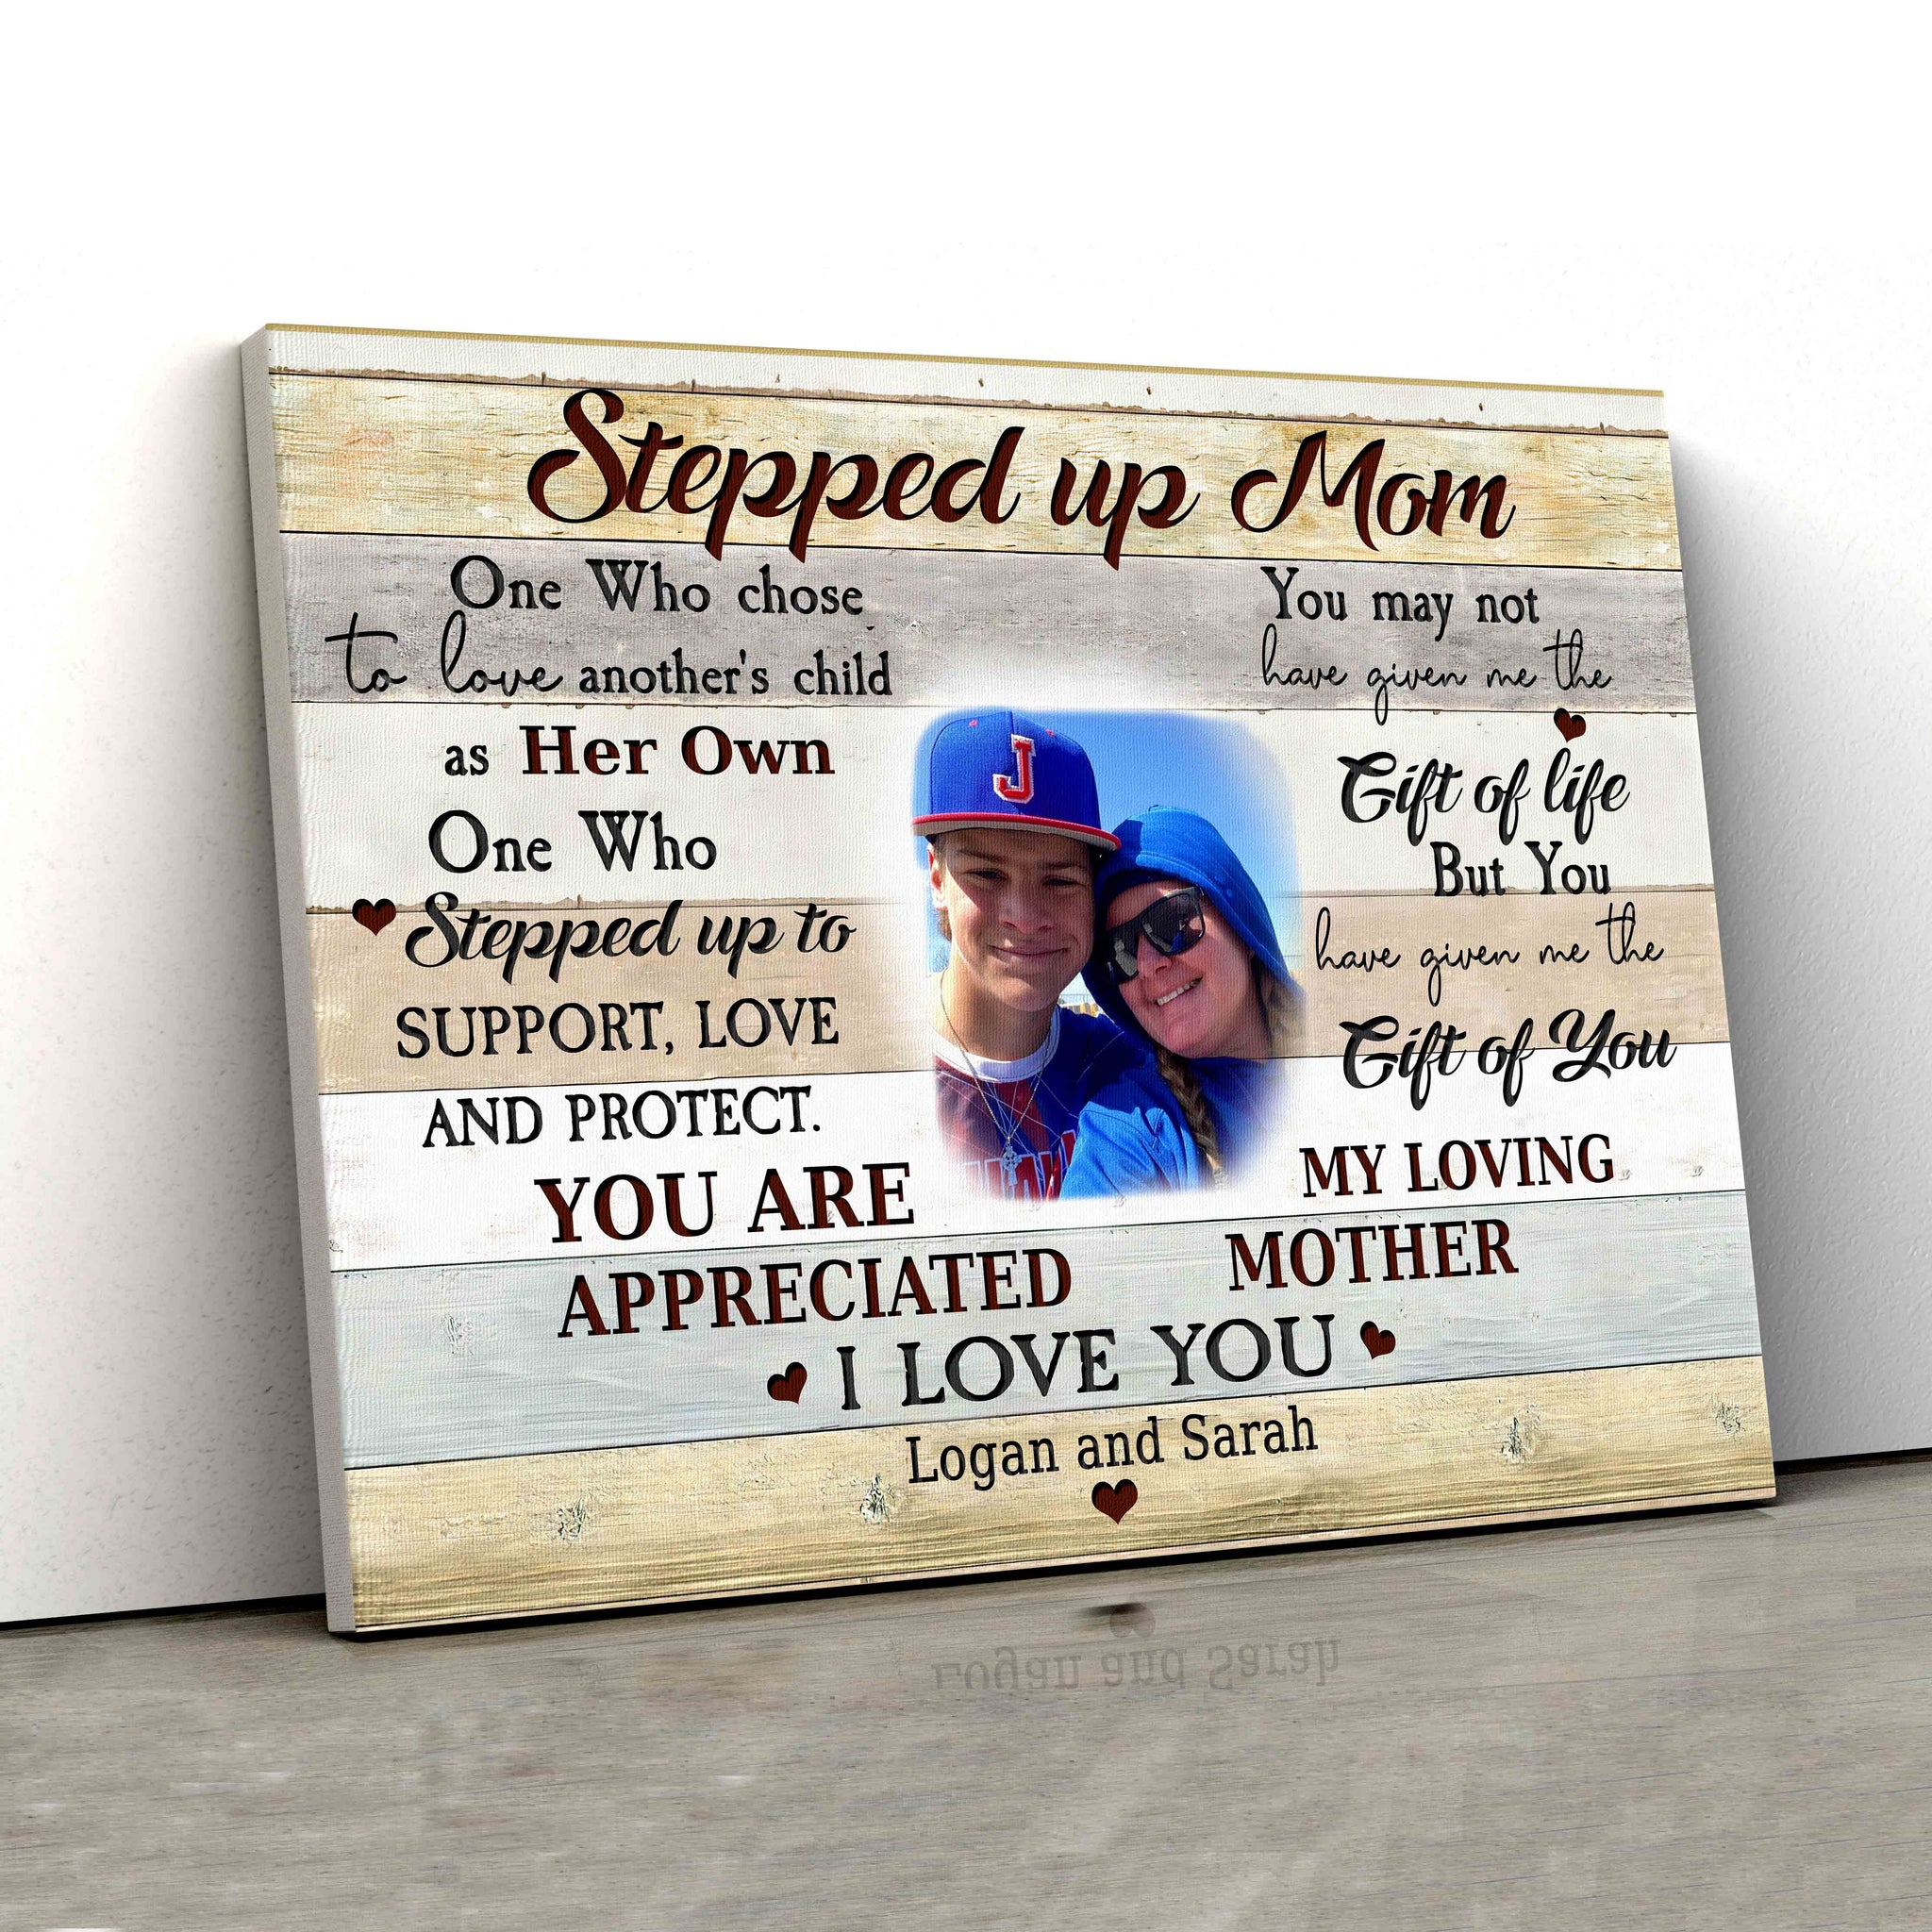 Stepped Up Mom Canvas, Family Canvas, Personalized Image Canvas, Custom Name Canvas, Canvas Wall Art, Gift Canvas